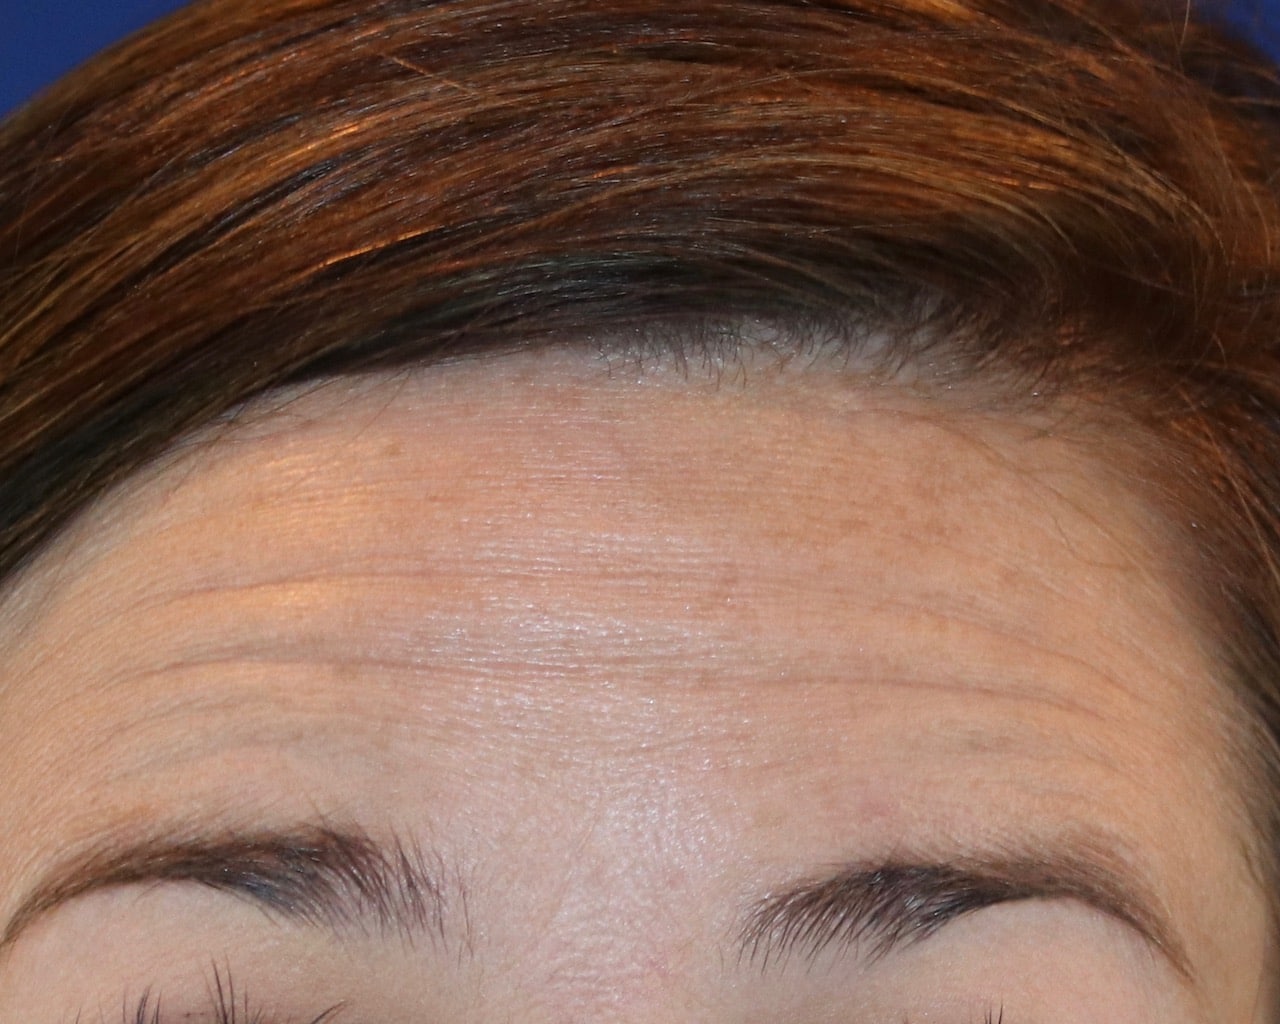 woman’s wrinkled forehead before botox injections